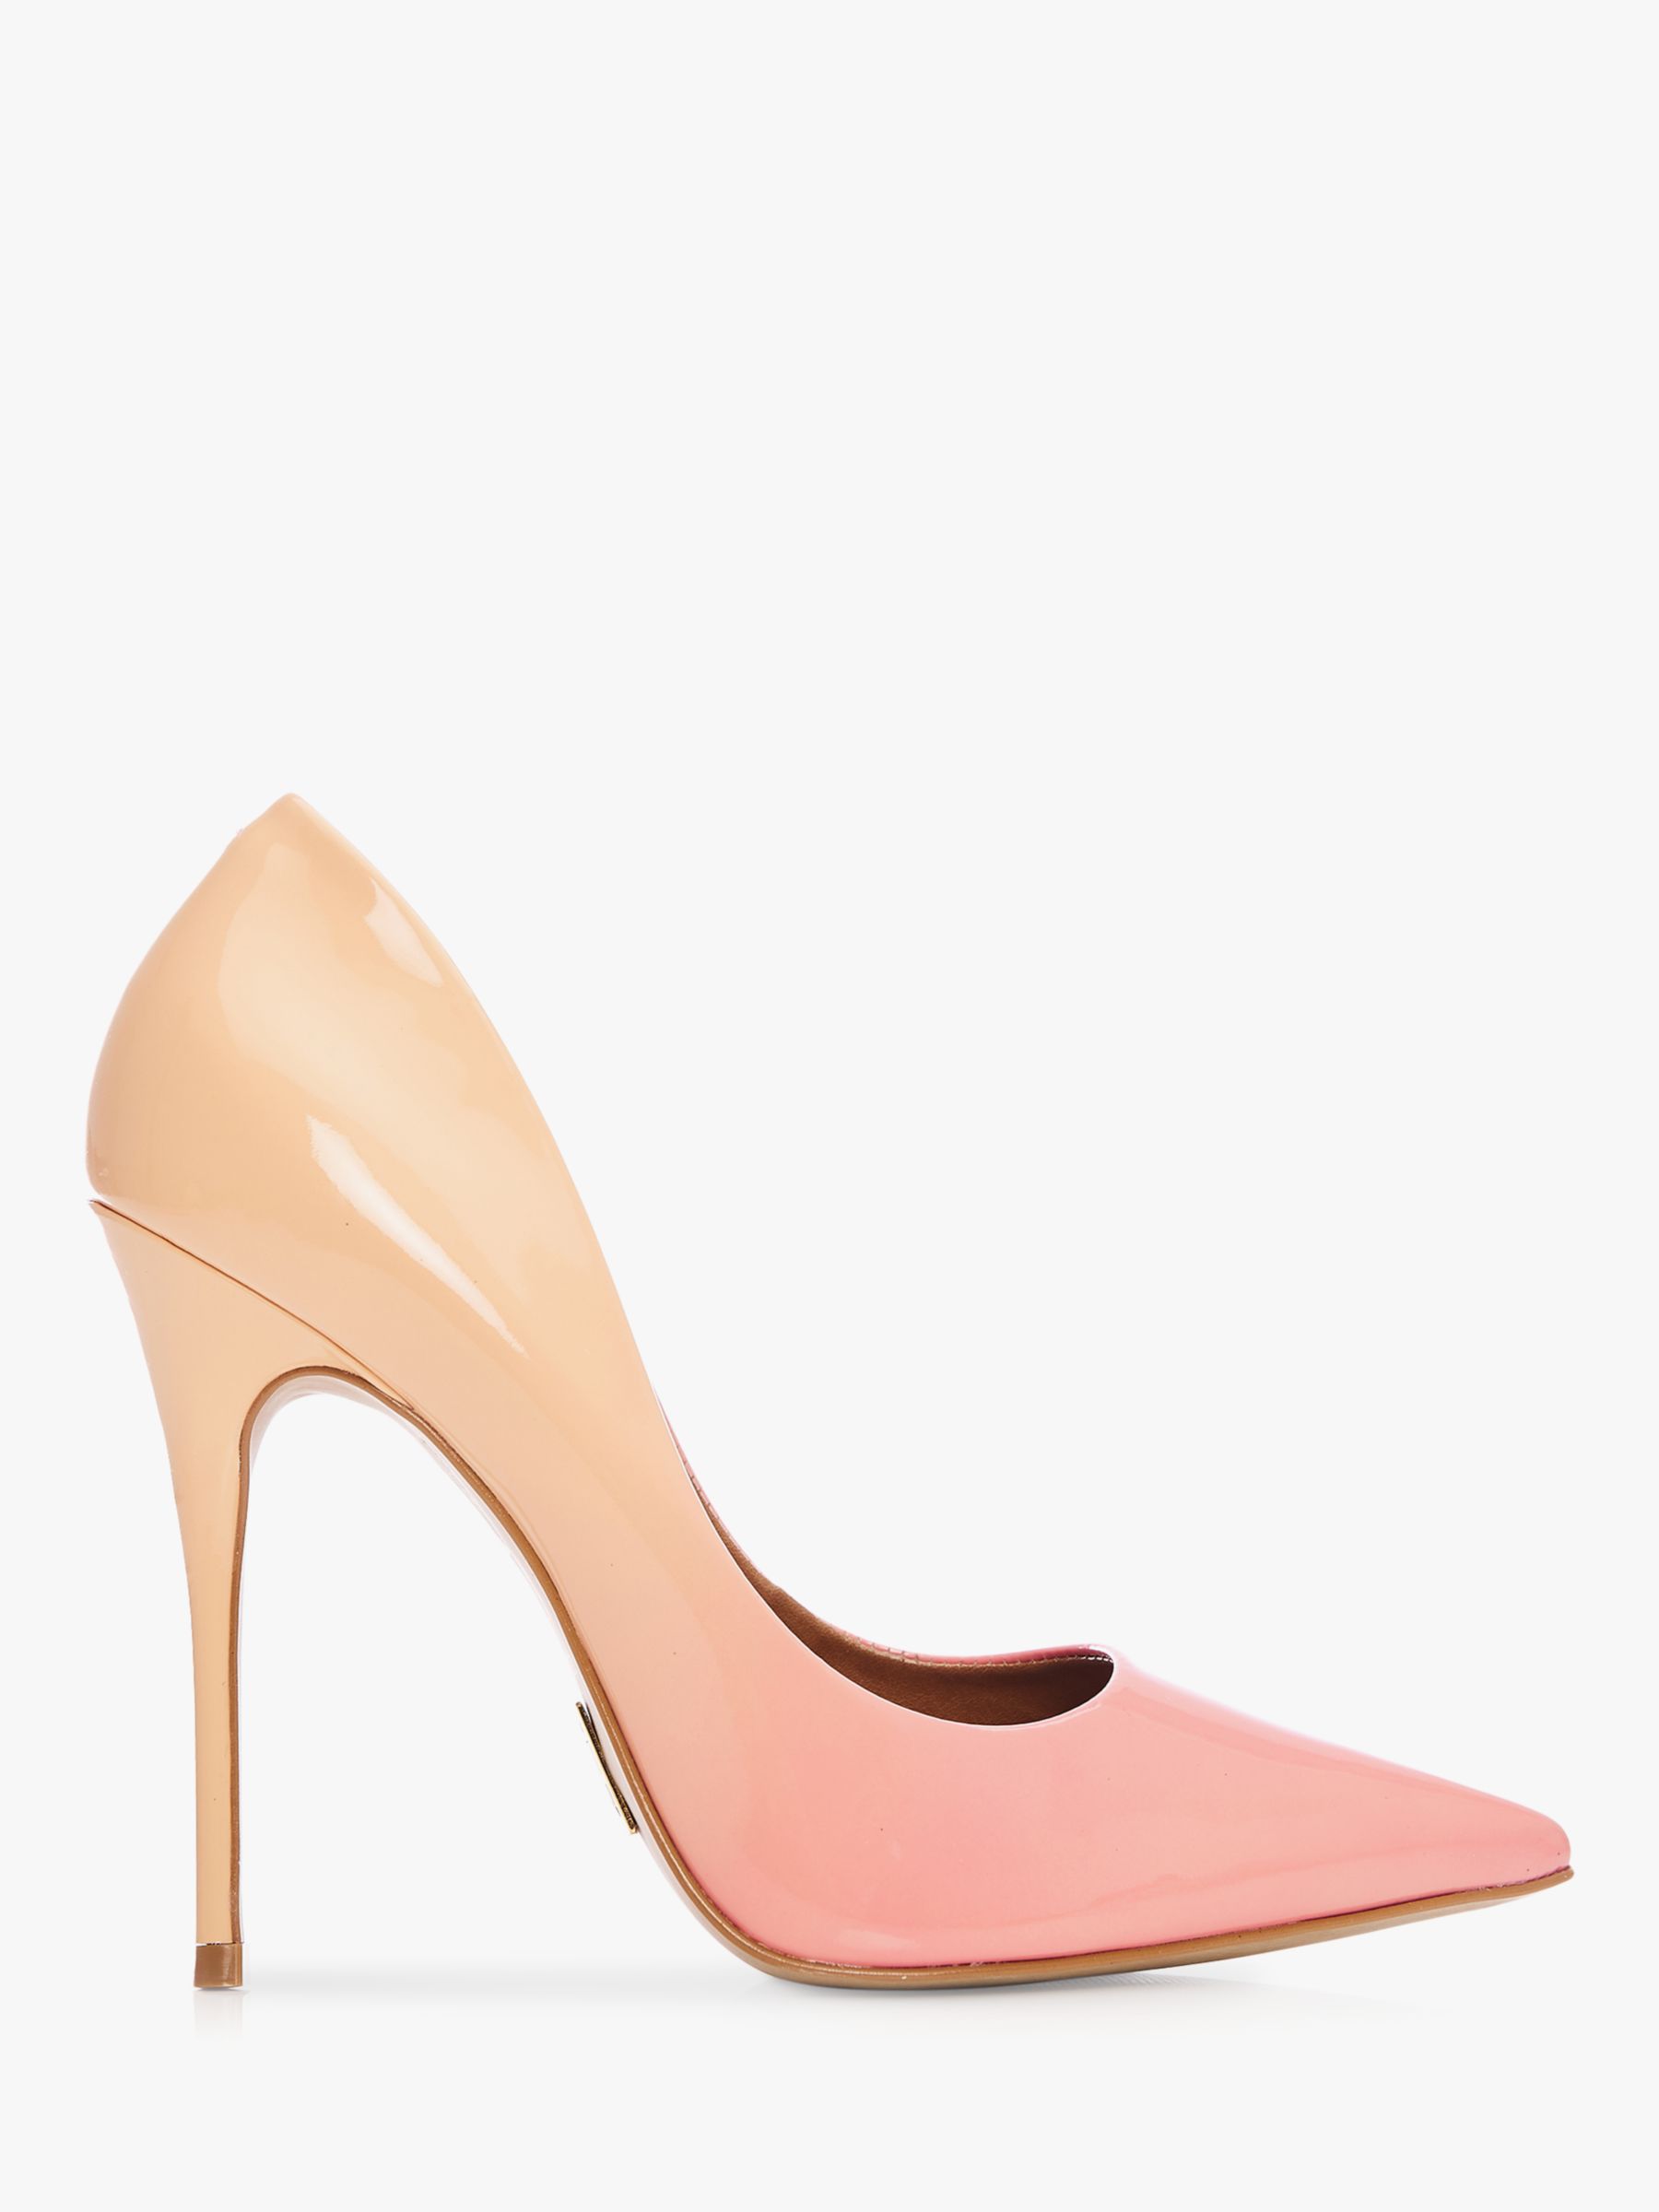 Moda in Pelle Christina Leather Stilleto Heel Court Shoes, Pink Patent ...